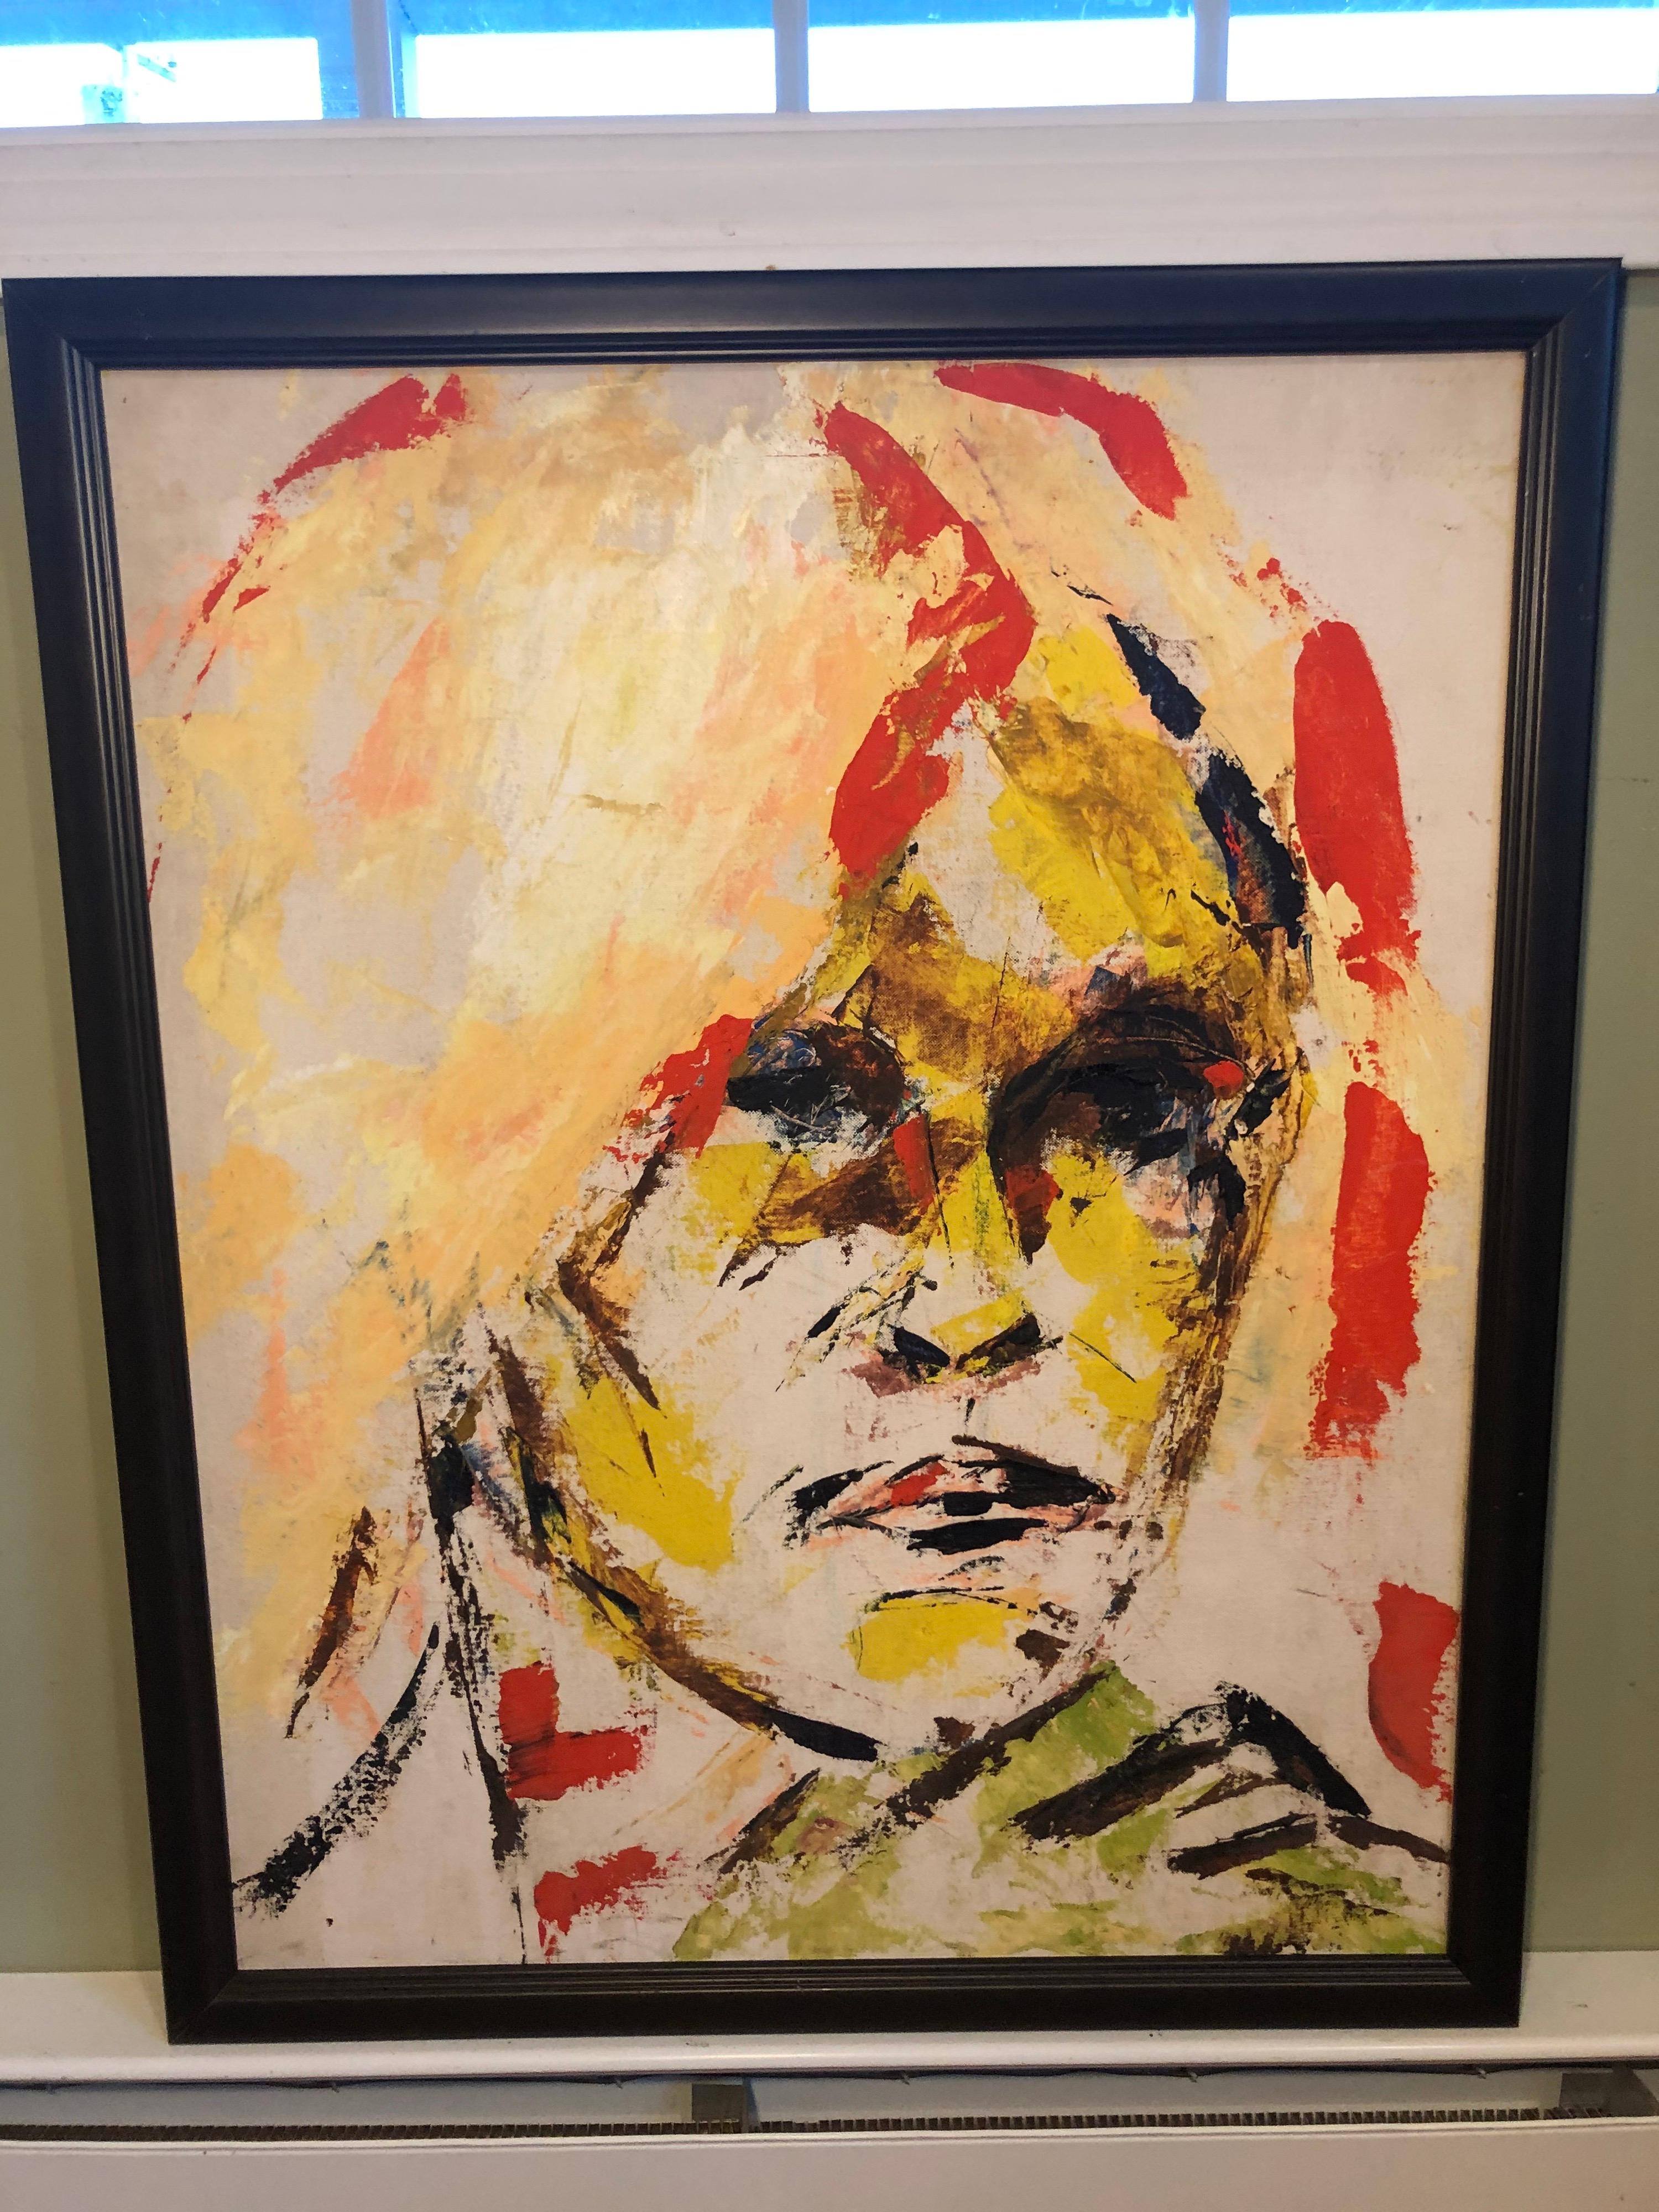 Mid Century Modern Abstract of Andy Warhol Style Man. Large white masonite background with impasto strokes of red, white and black and yellow. Housed in a black frame.